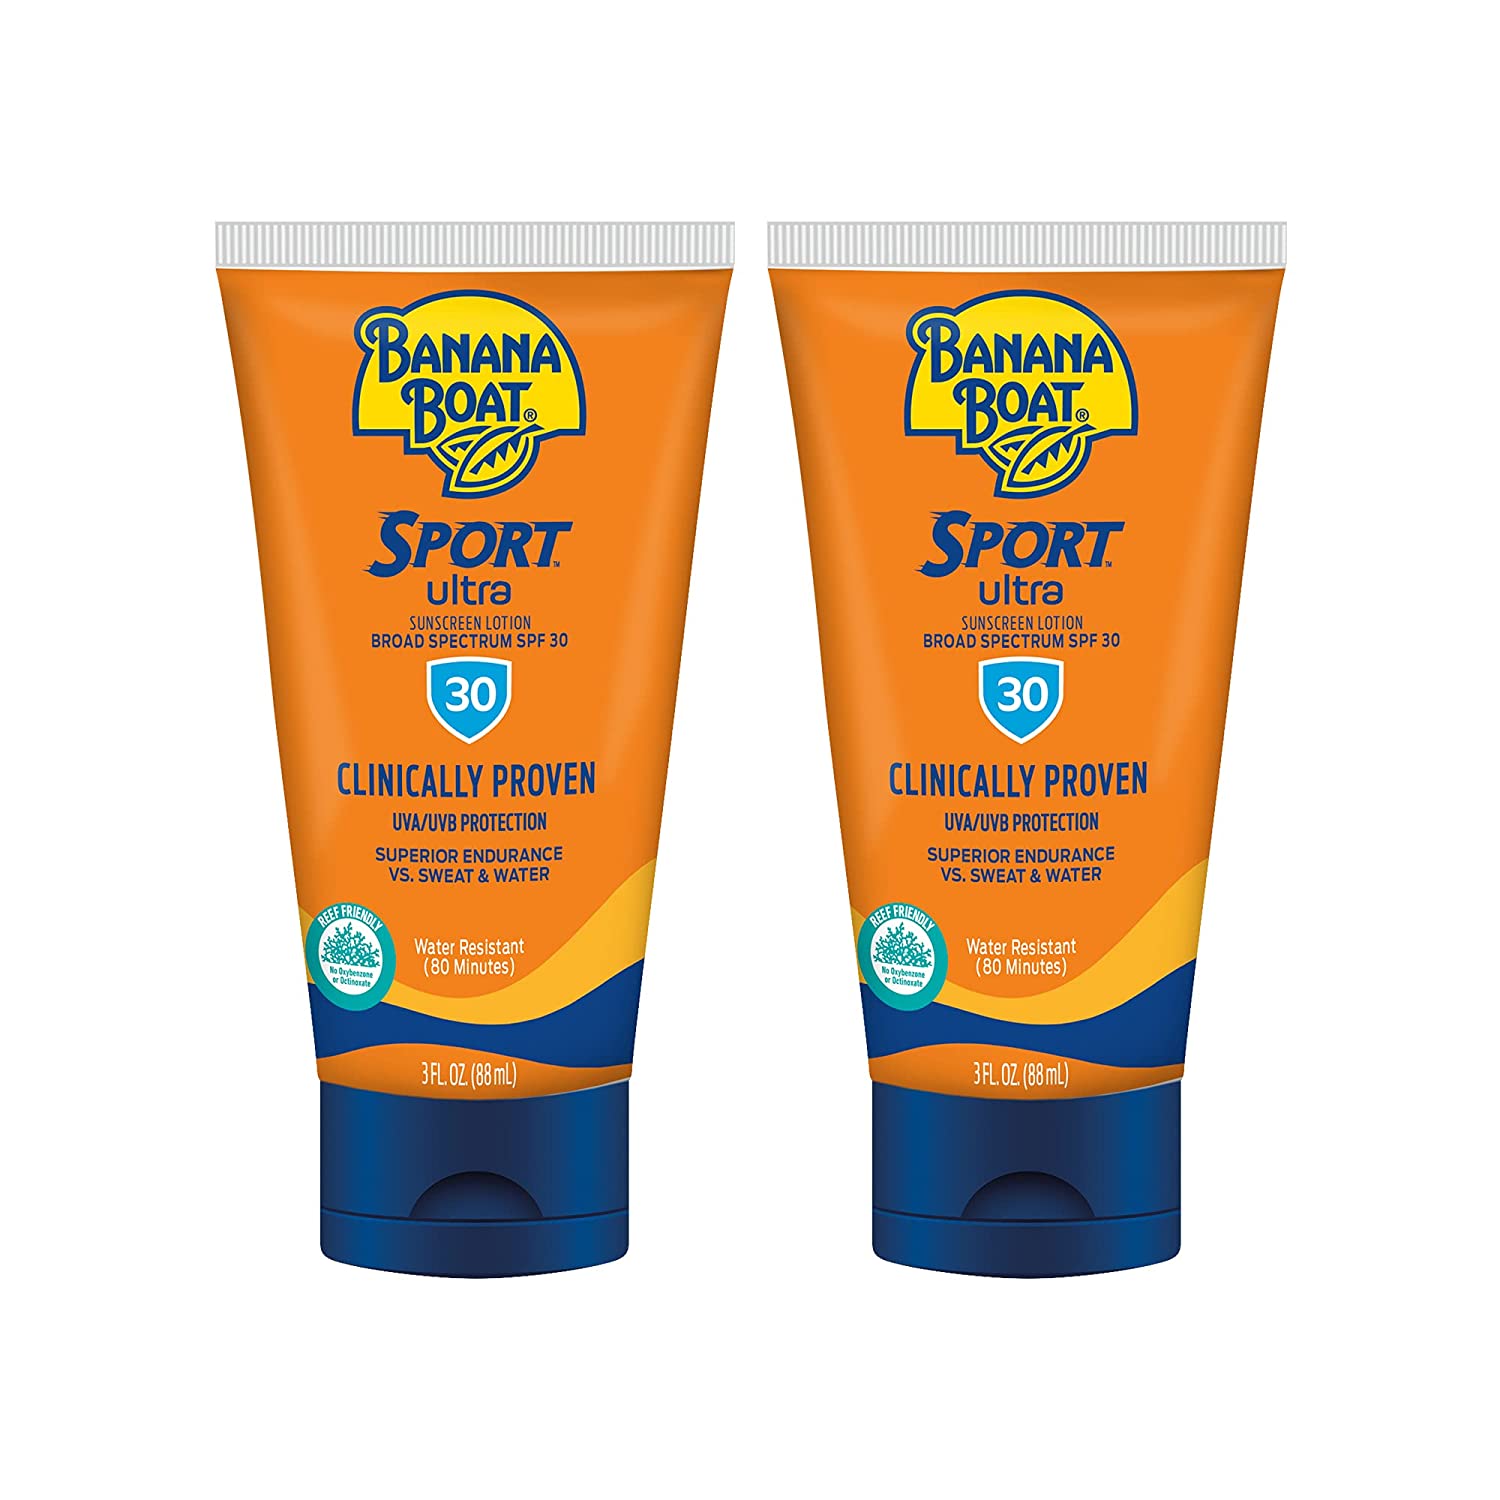 2-Pack 3-Oz Banana Boat Sport Ultra SPF 30 Sunscreen Lotion $4.20 w/ S&S + Free Shipping w/ Amazon Prime or Orders $25+